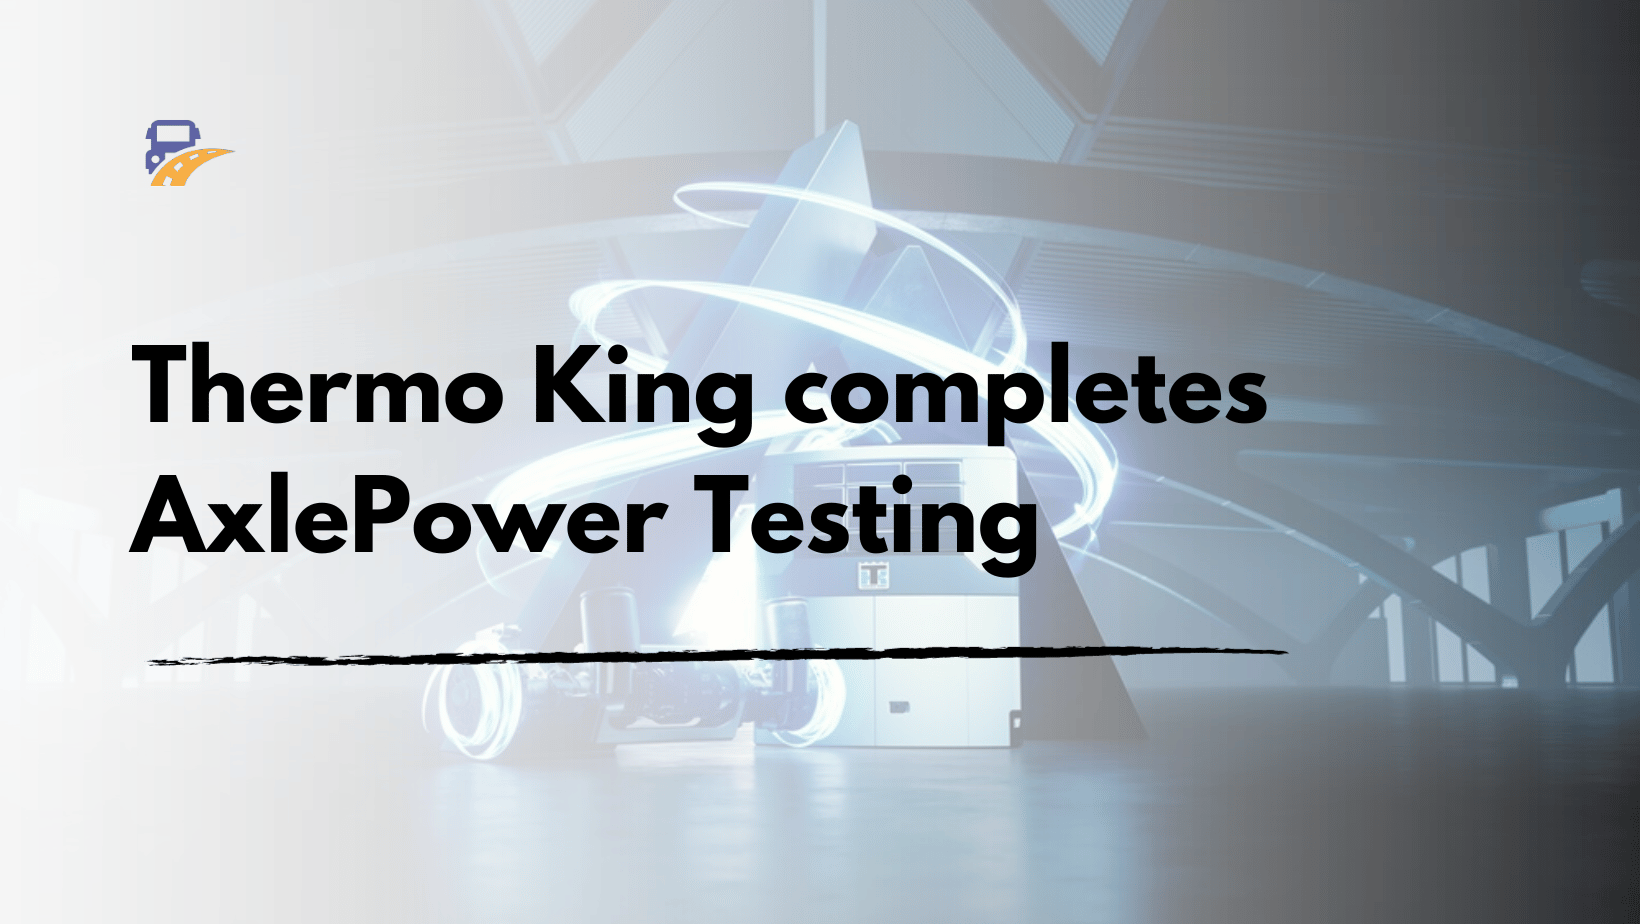 Thermo King completes AxlePower Testing